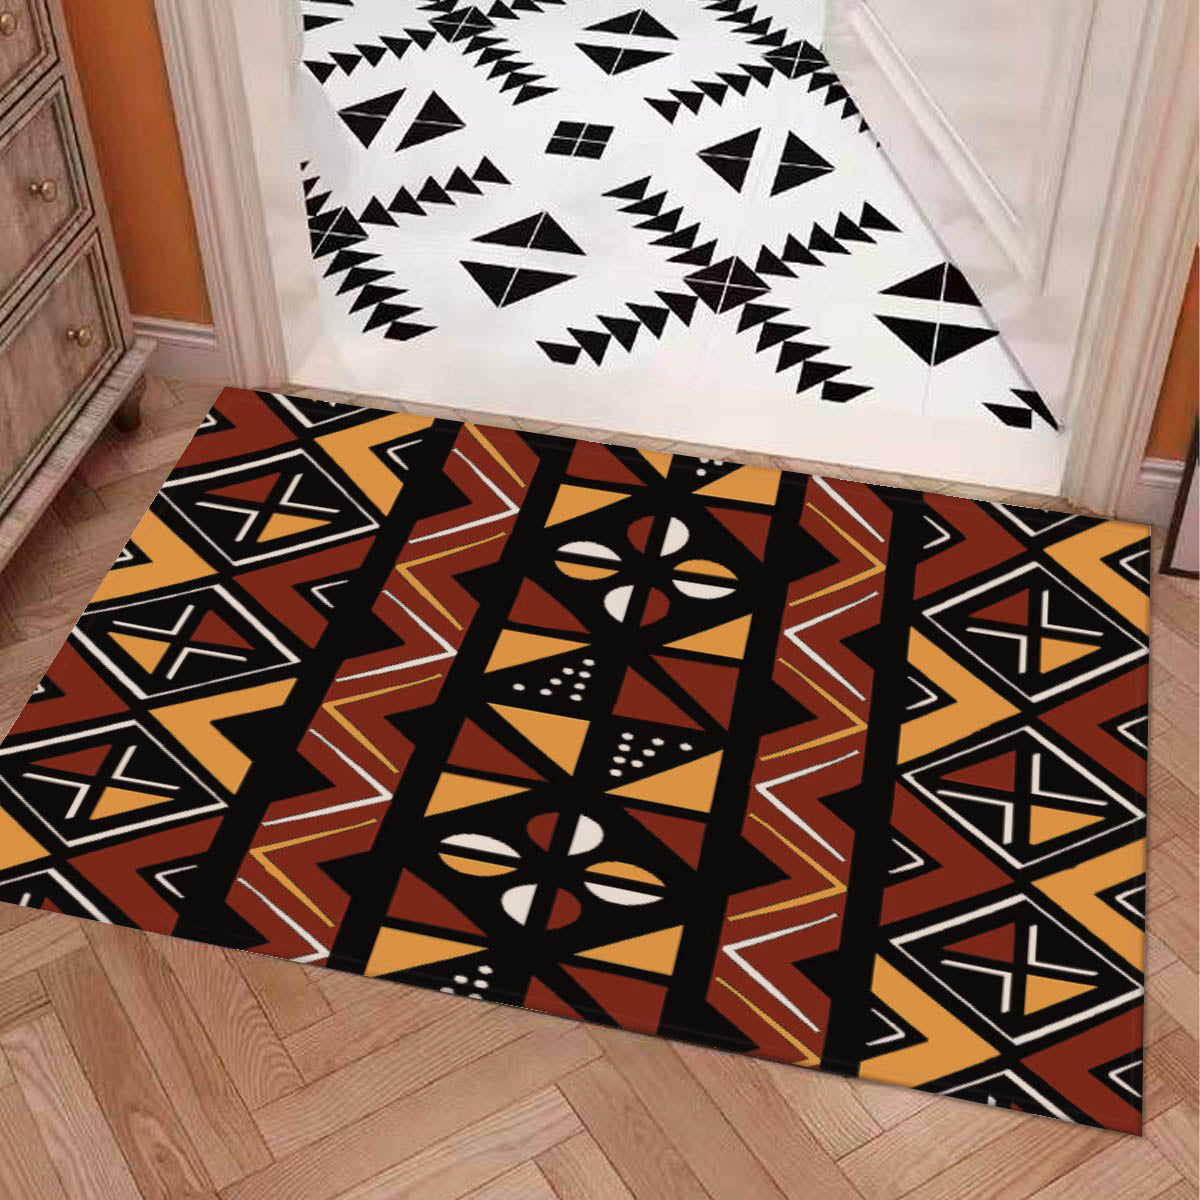 Authentic Mudcloth Print African Bathroom Rugs - Bynelo